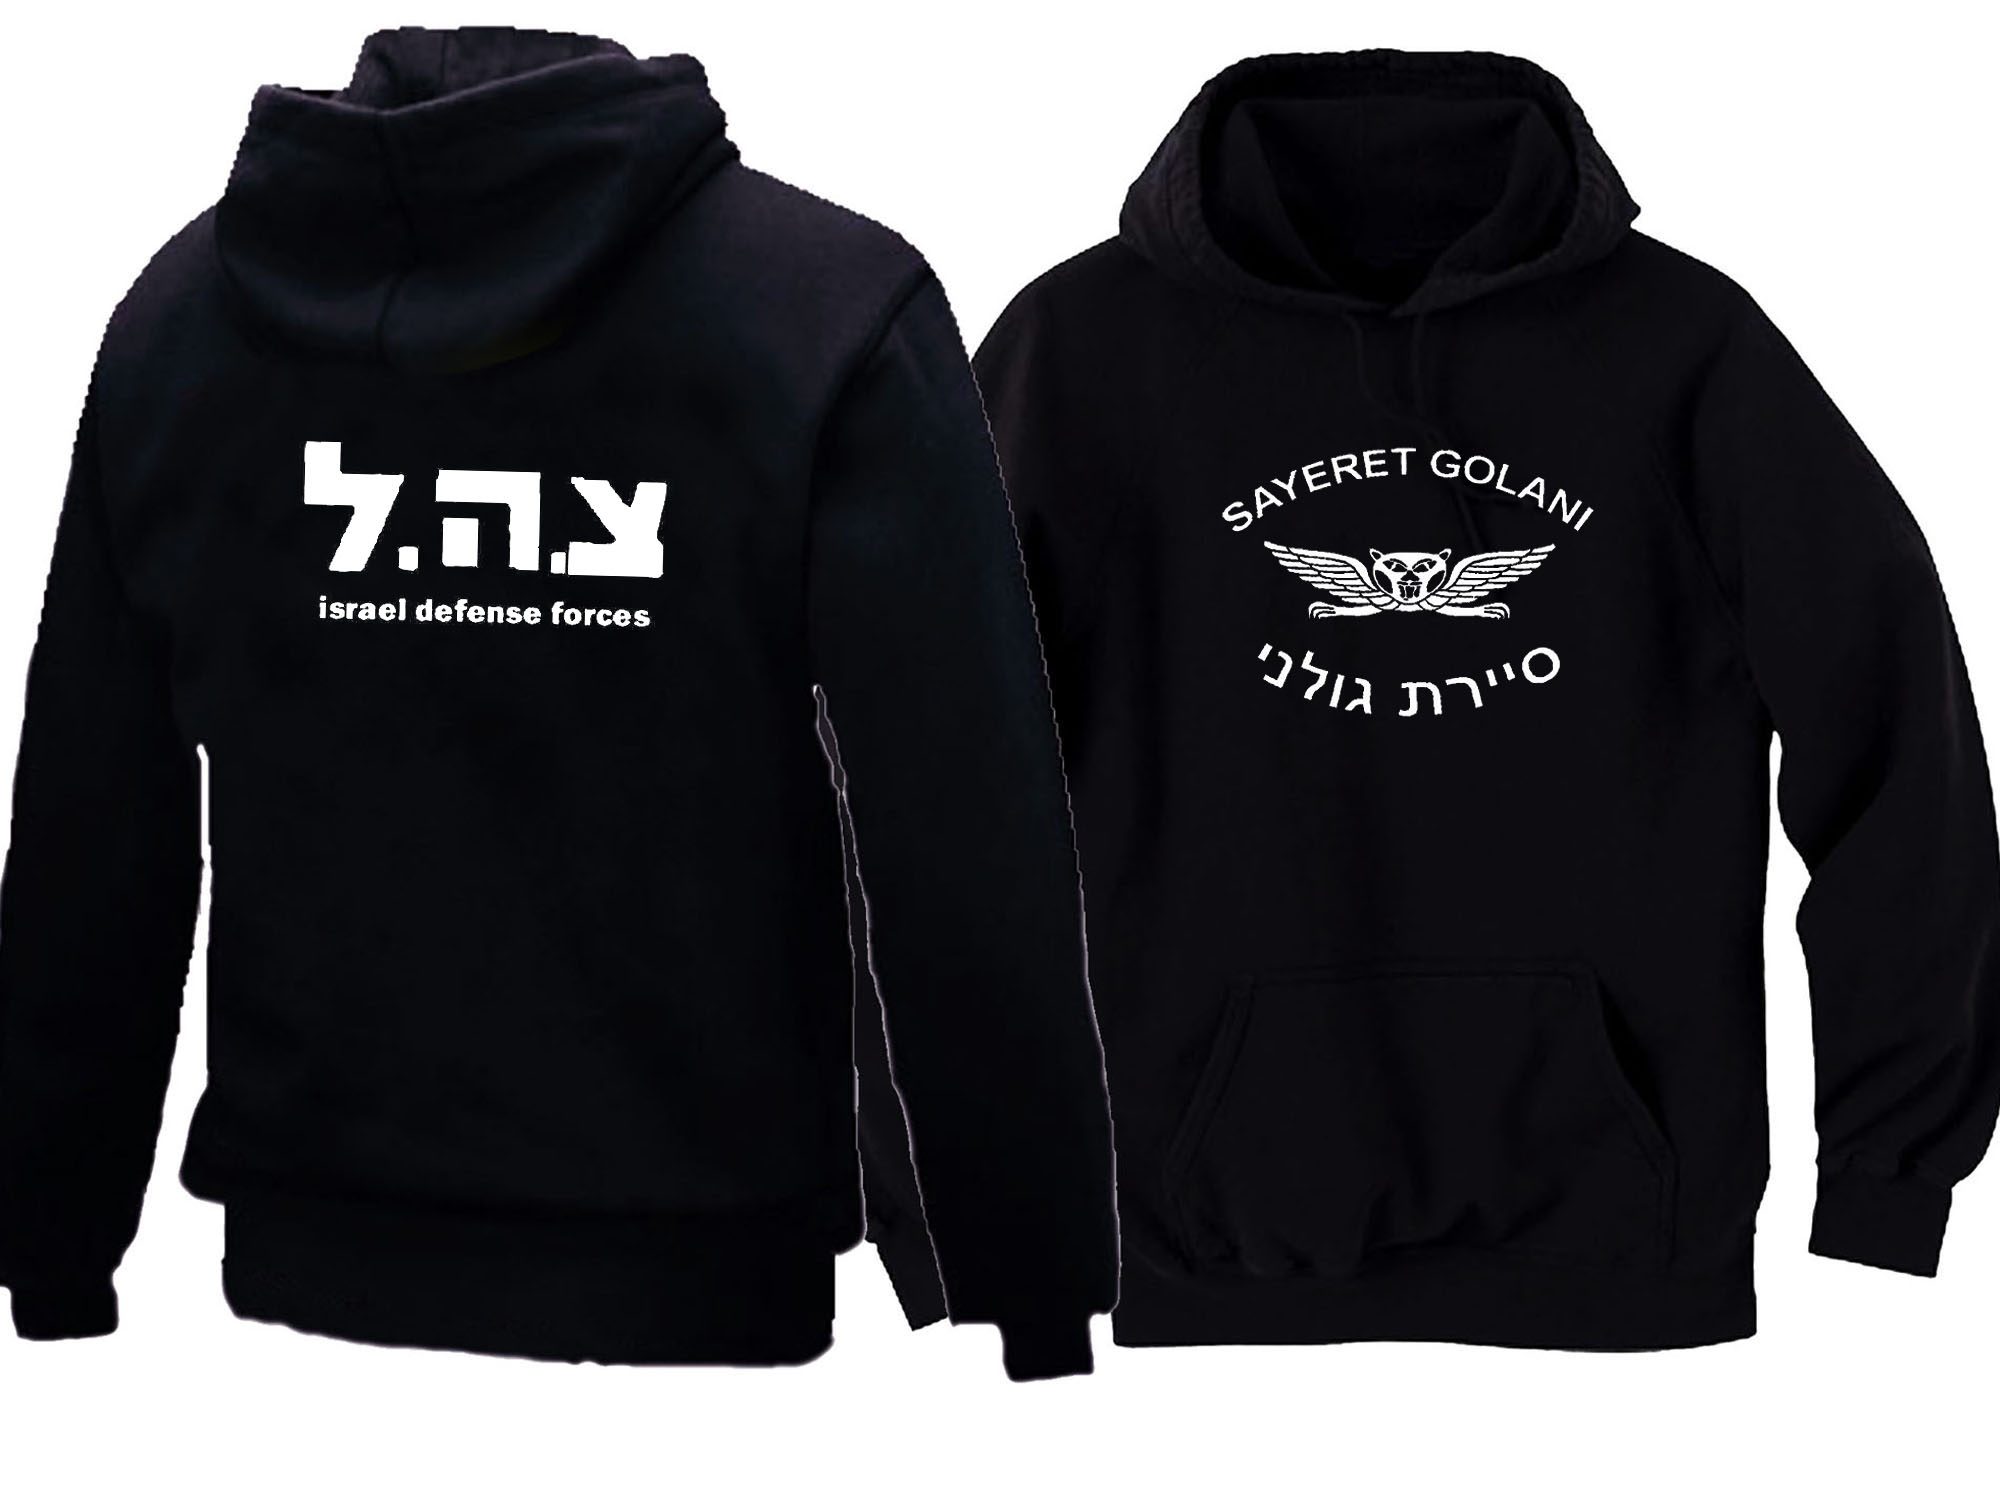 Sayeret Golani zahal special forces IDF Israel army Ops hoodie